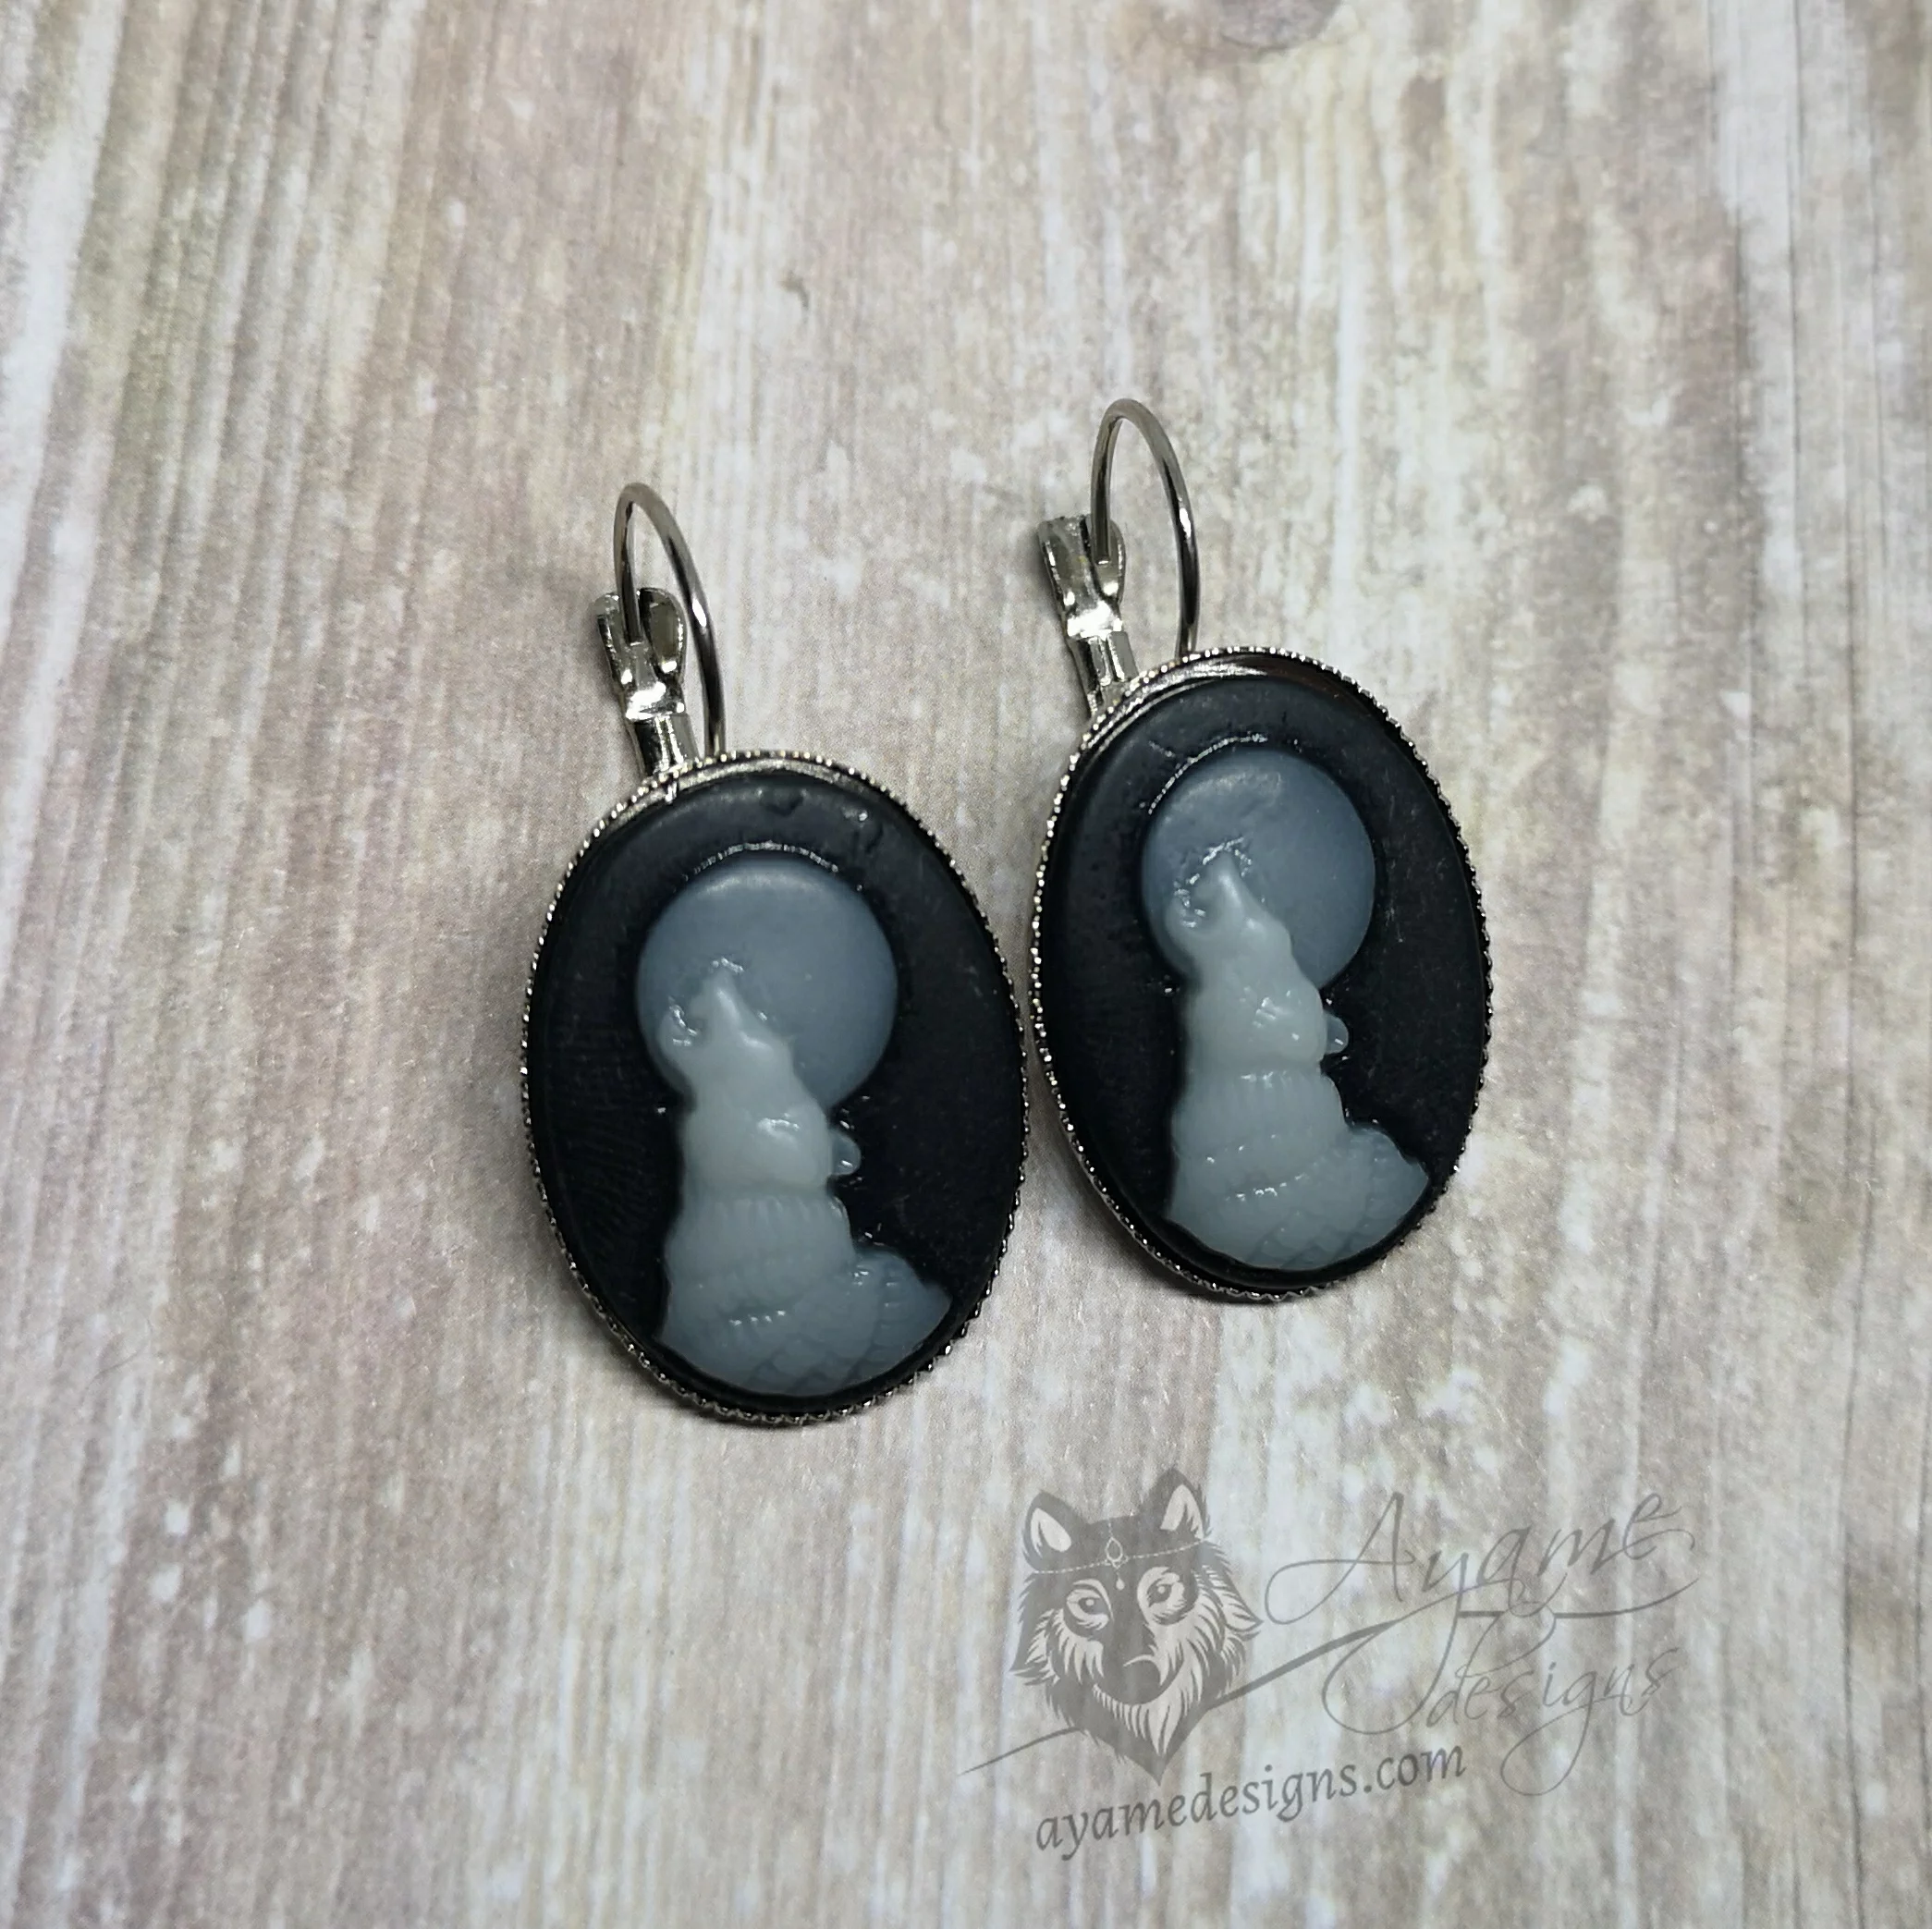 Stainless steel leverback earrings with wolf cameos